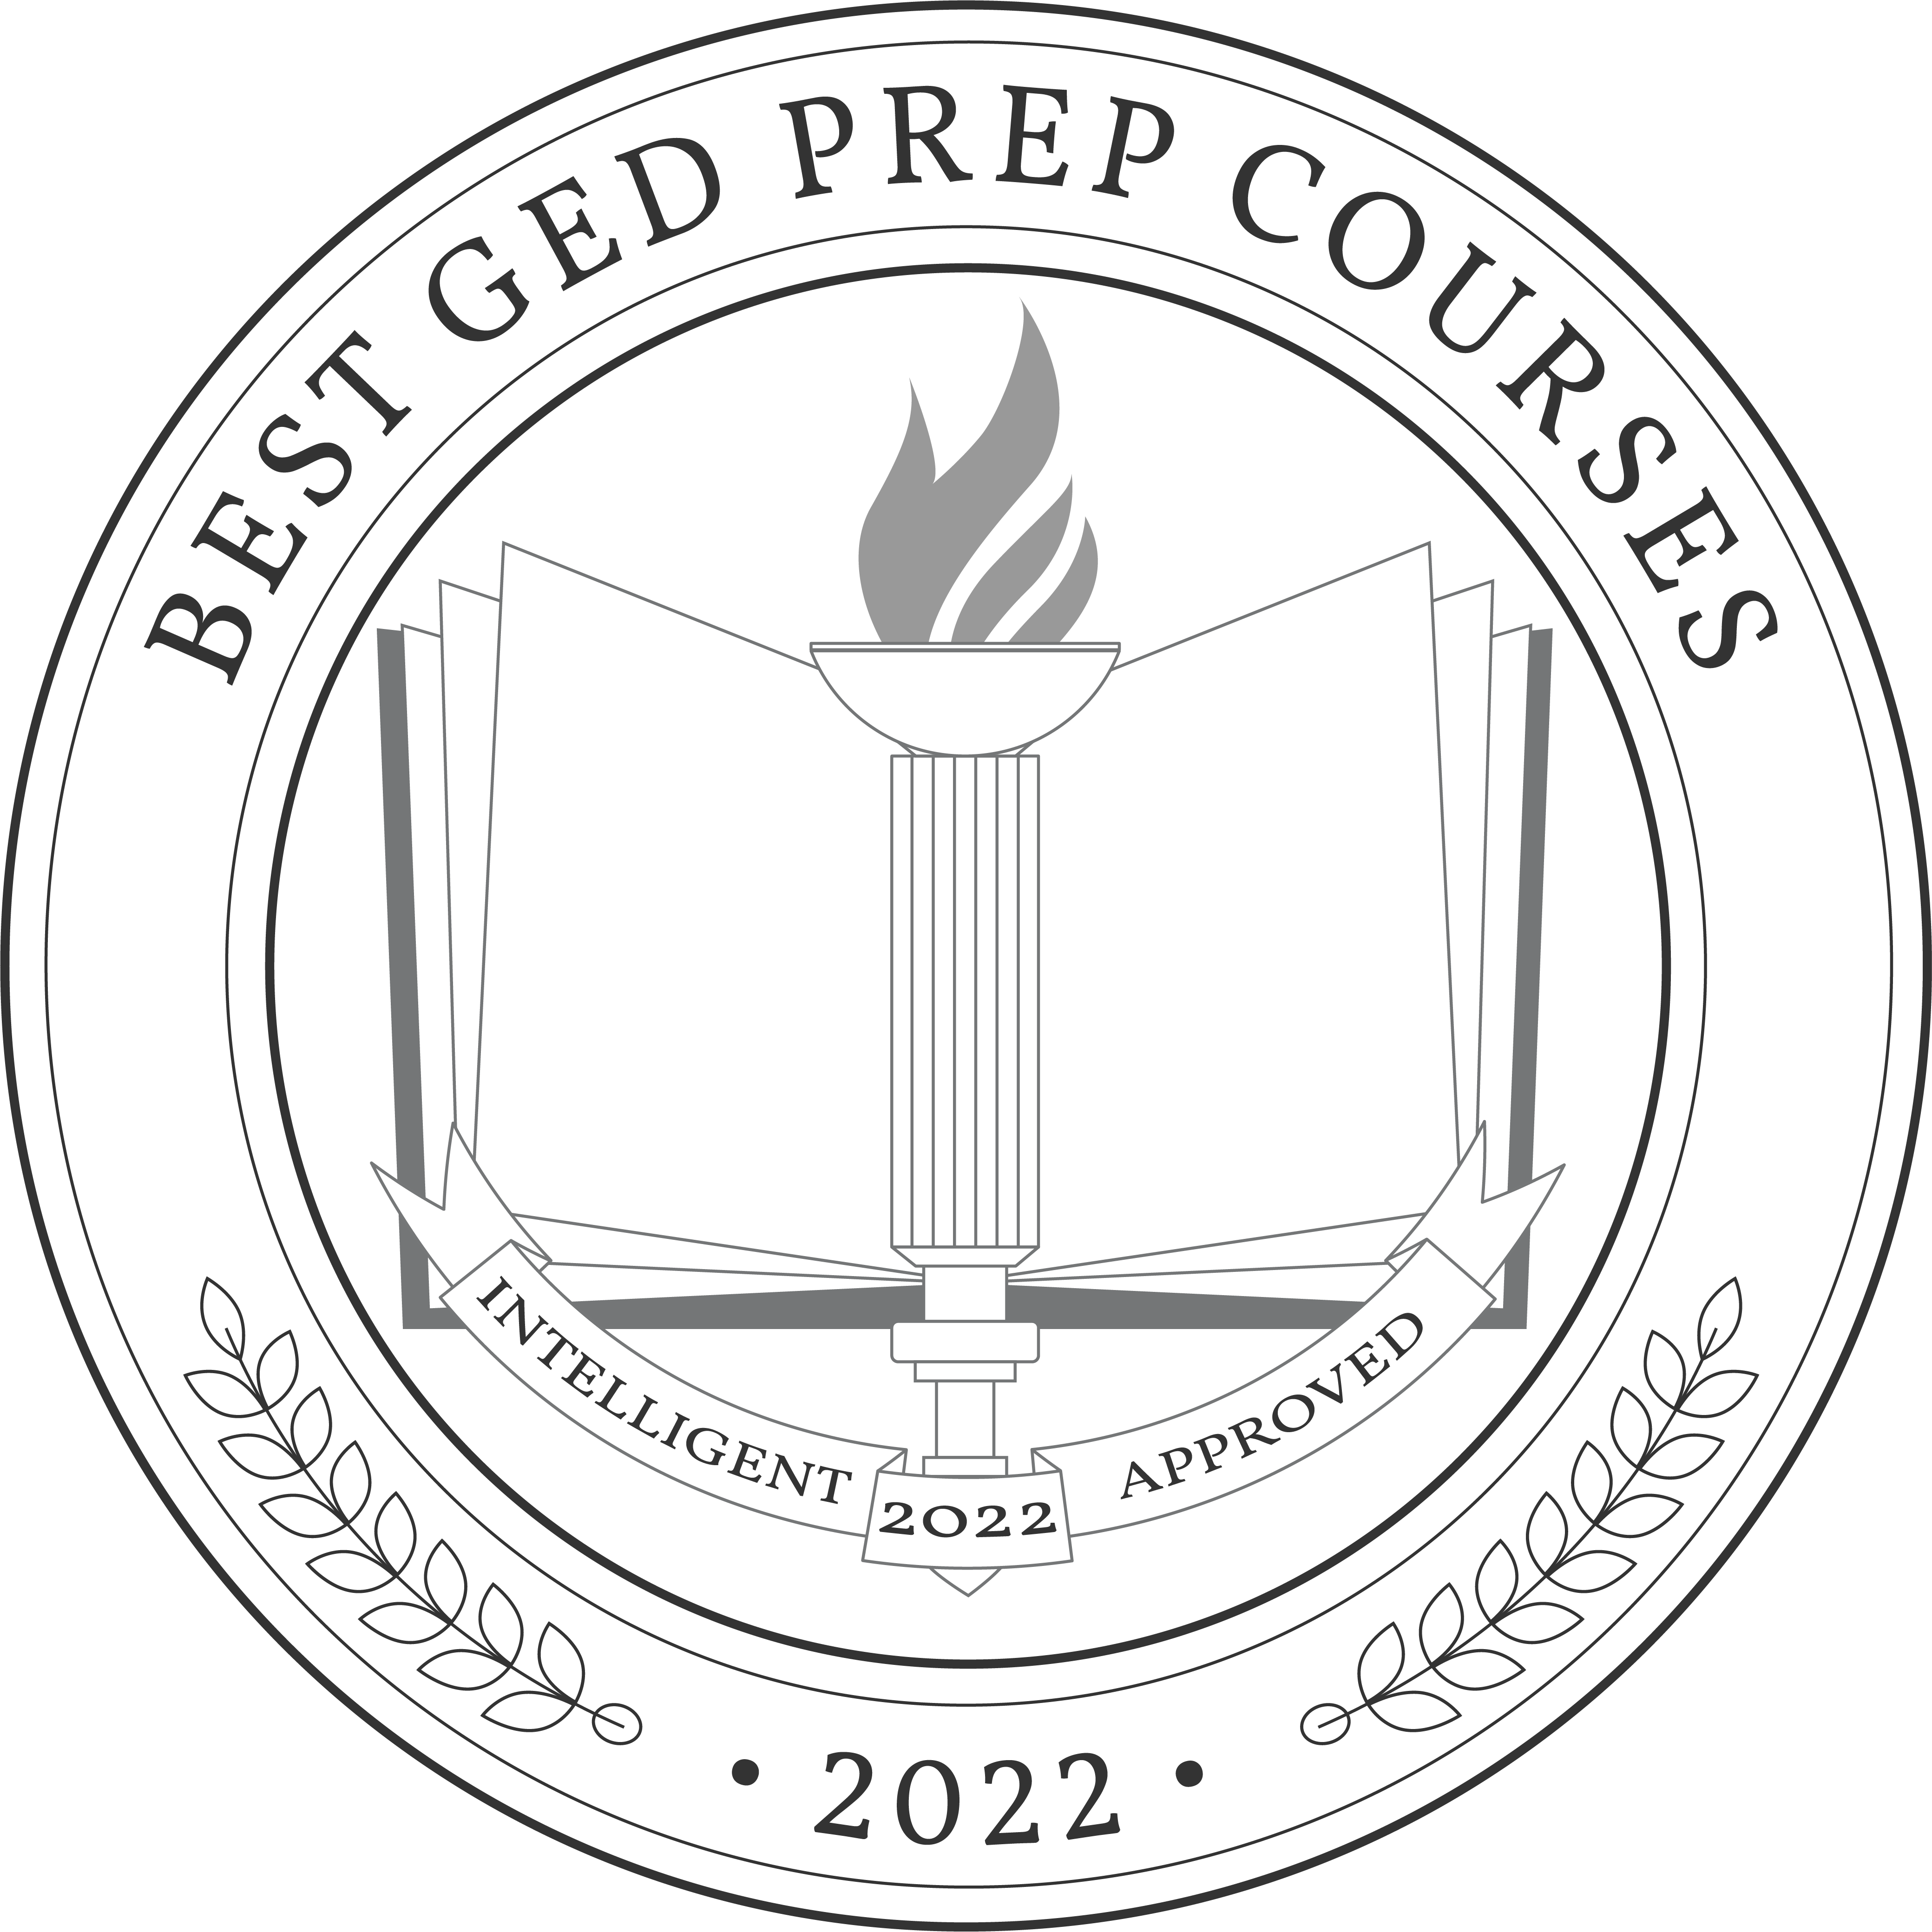 Best GED prep courses